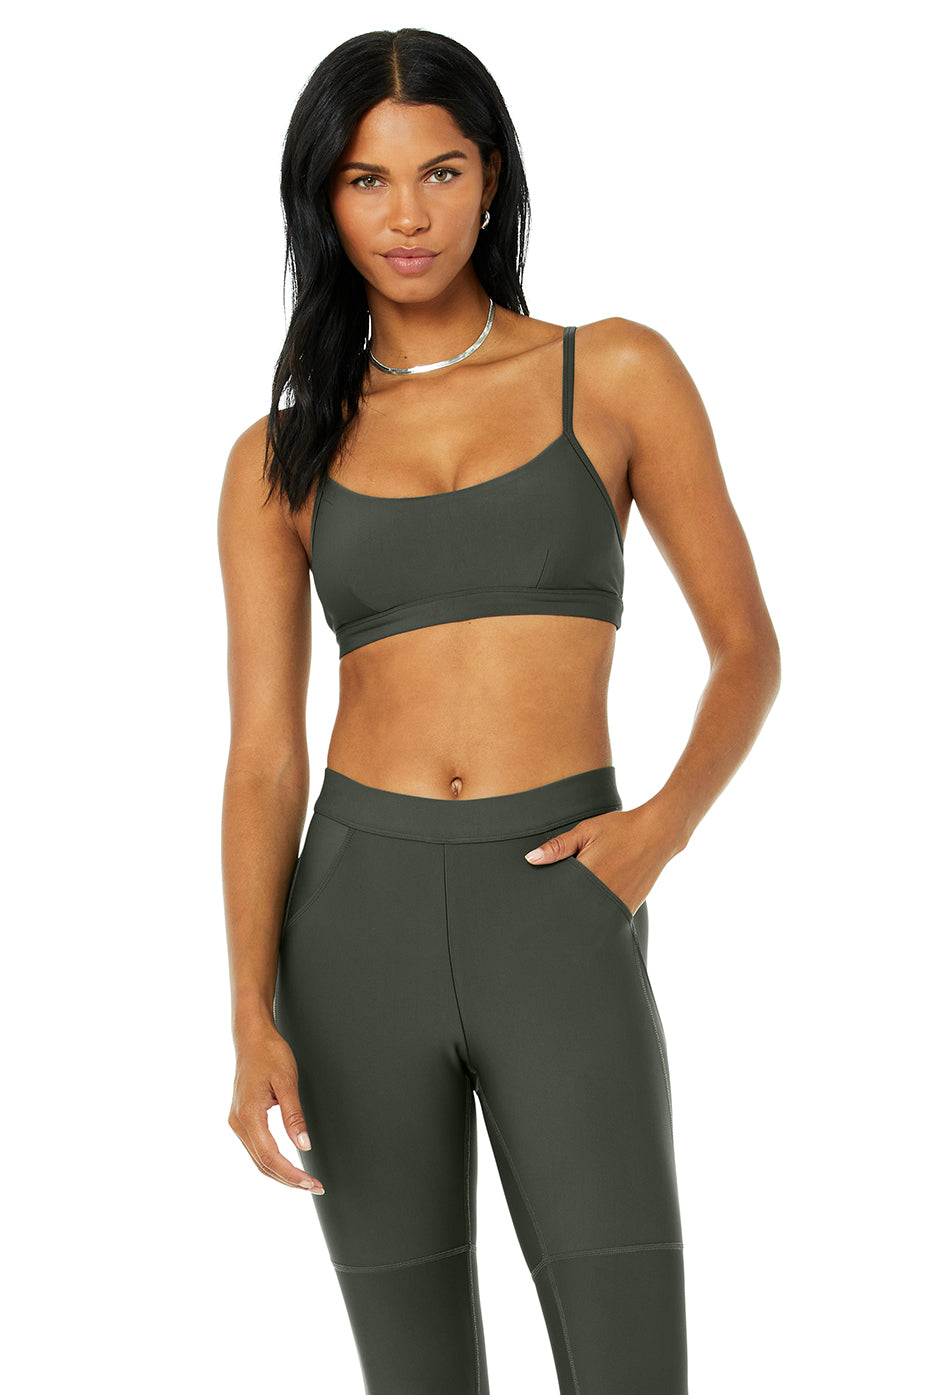 Airlift Intrigue Bra in Dark Cactus by Alo Yoga - Work Well Daily